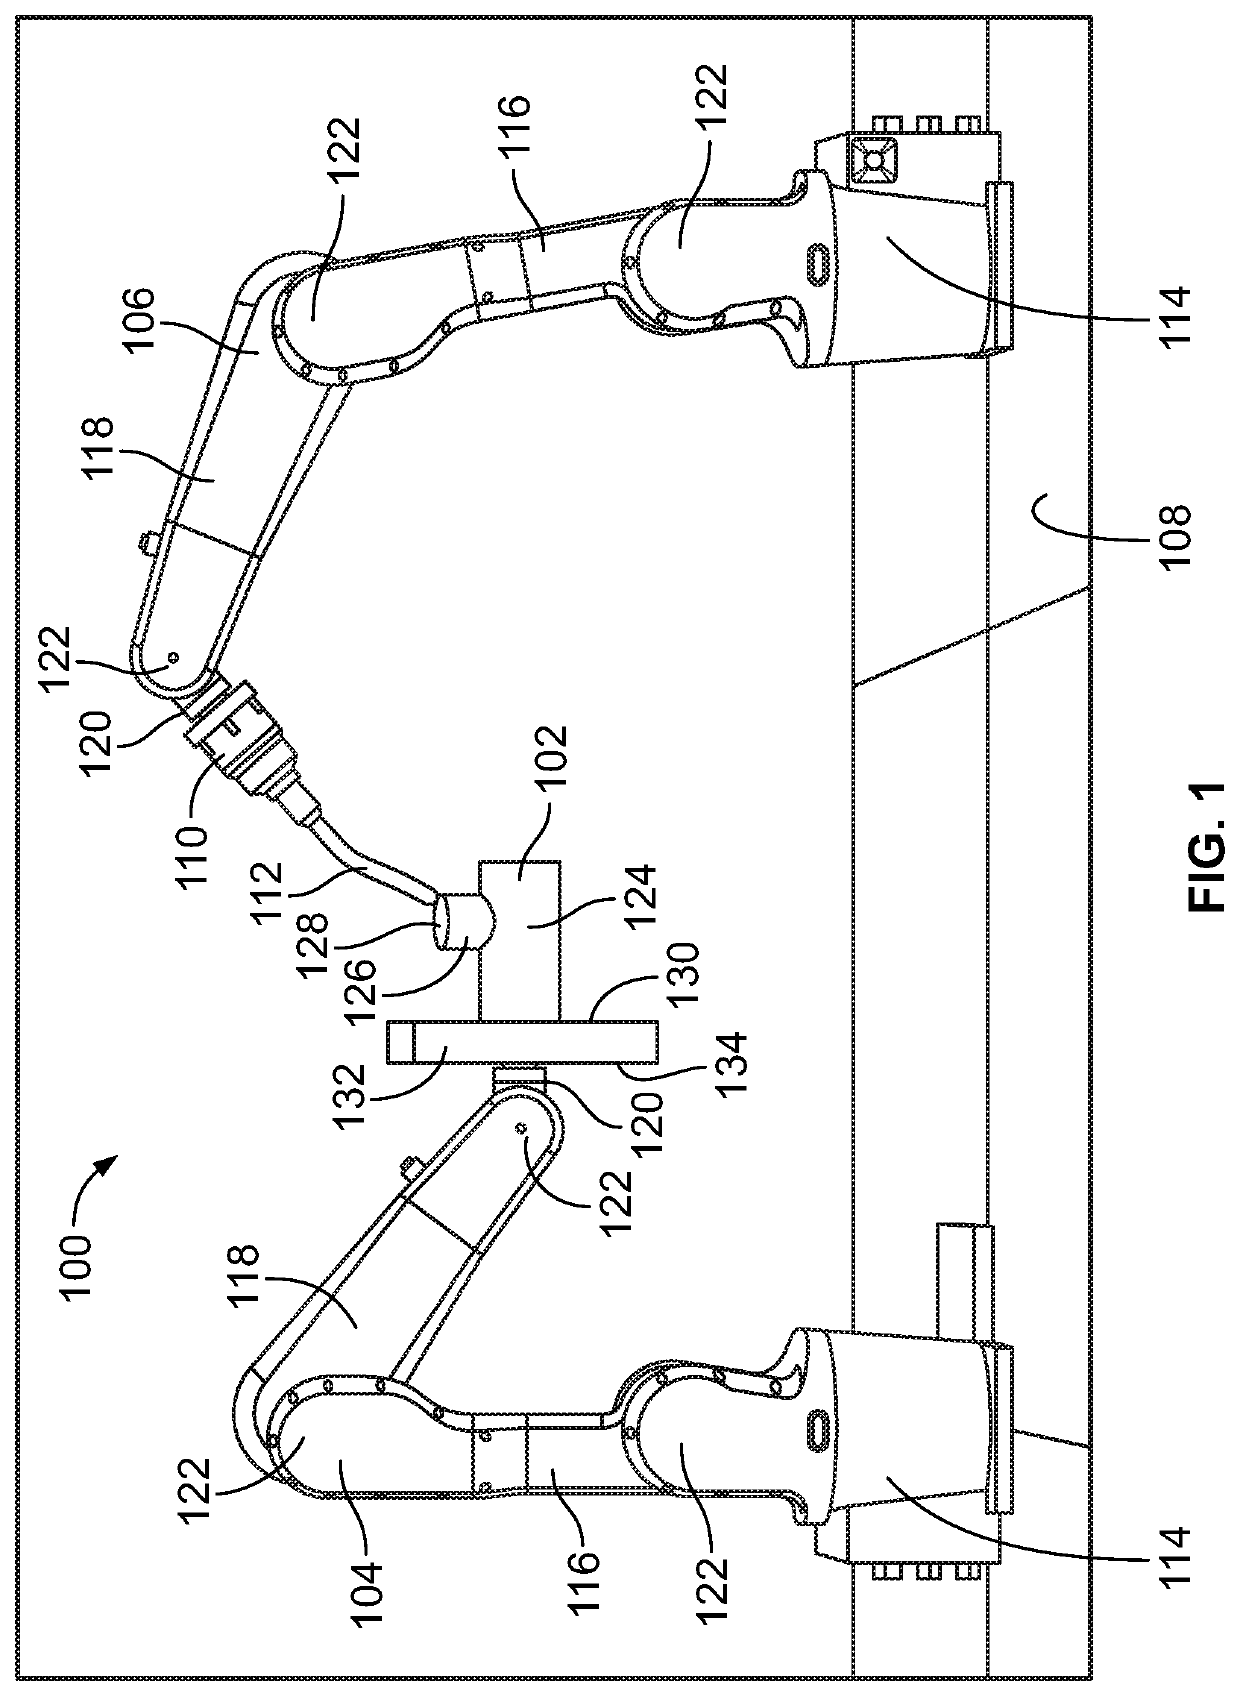 Additive manufacturing system and method using robotic arms